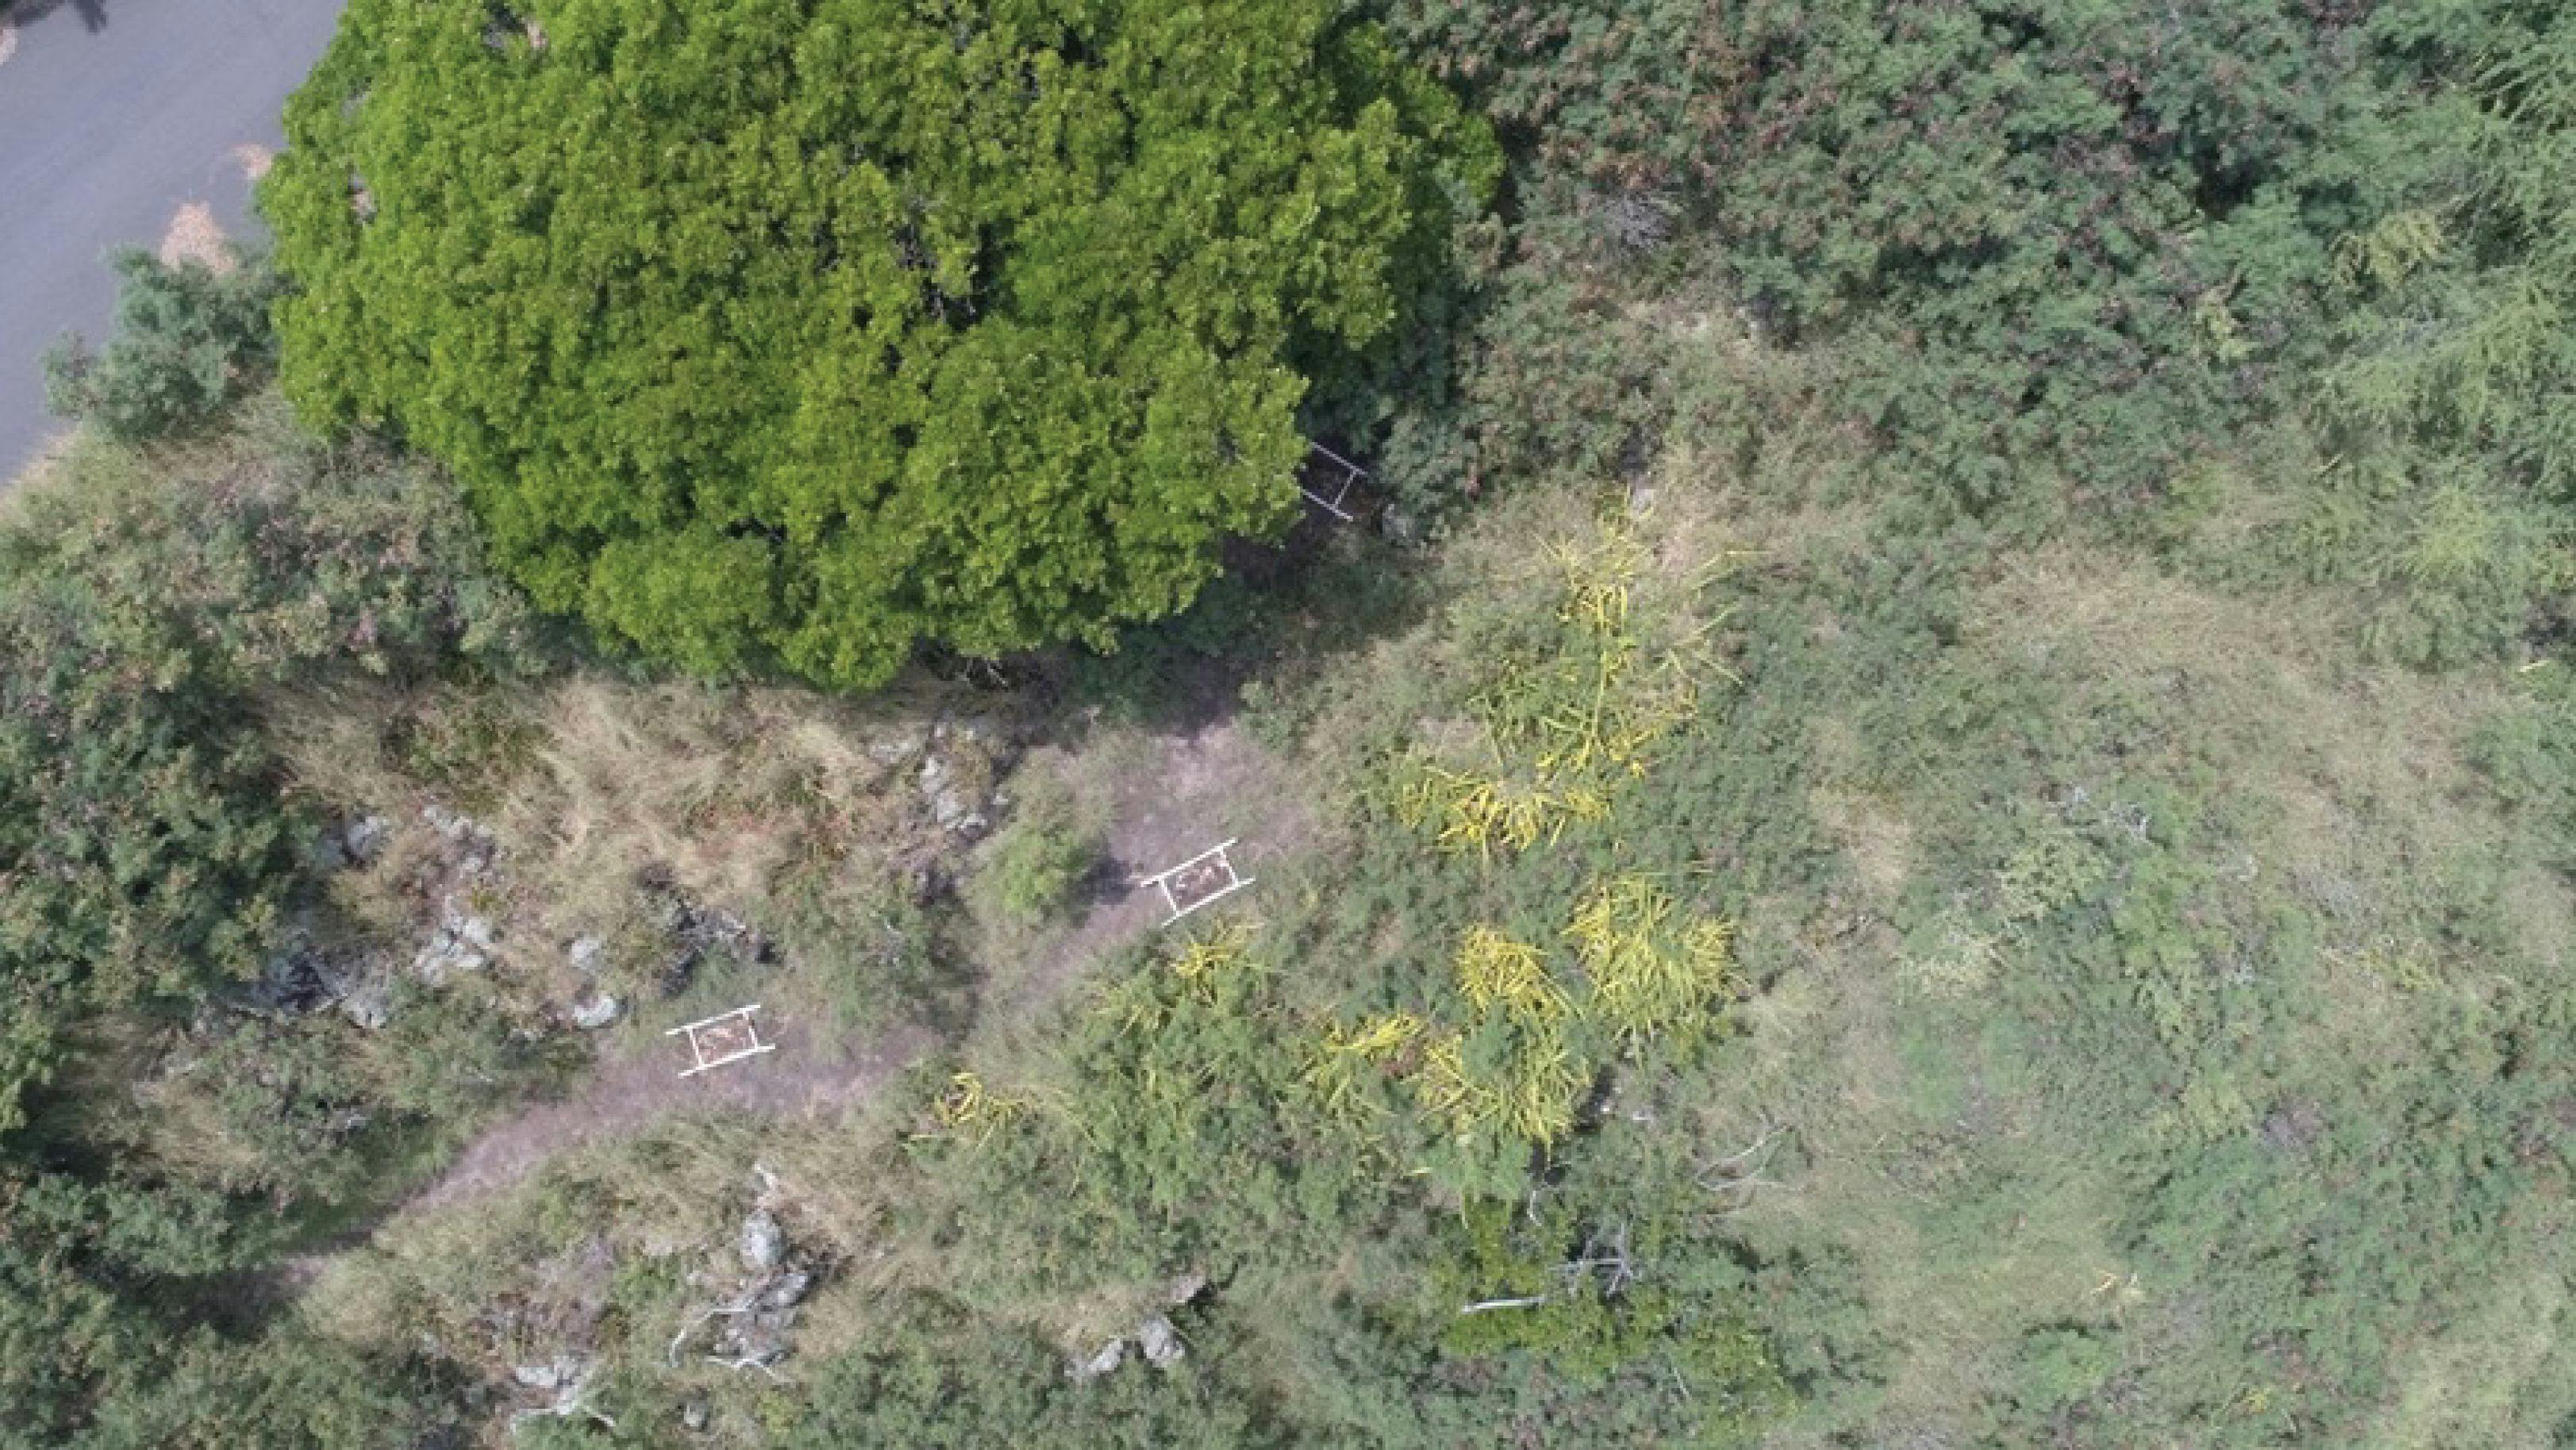 FIGURE 1: Aerial view of the outdoor decomposition site on Oahu, Hawaii.